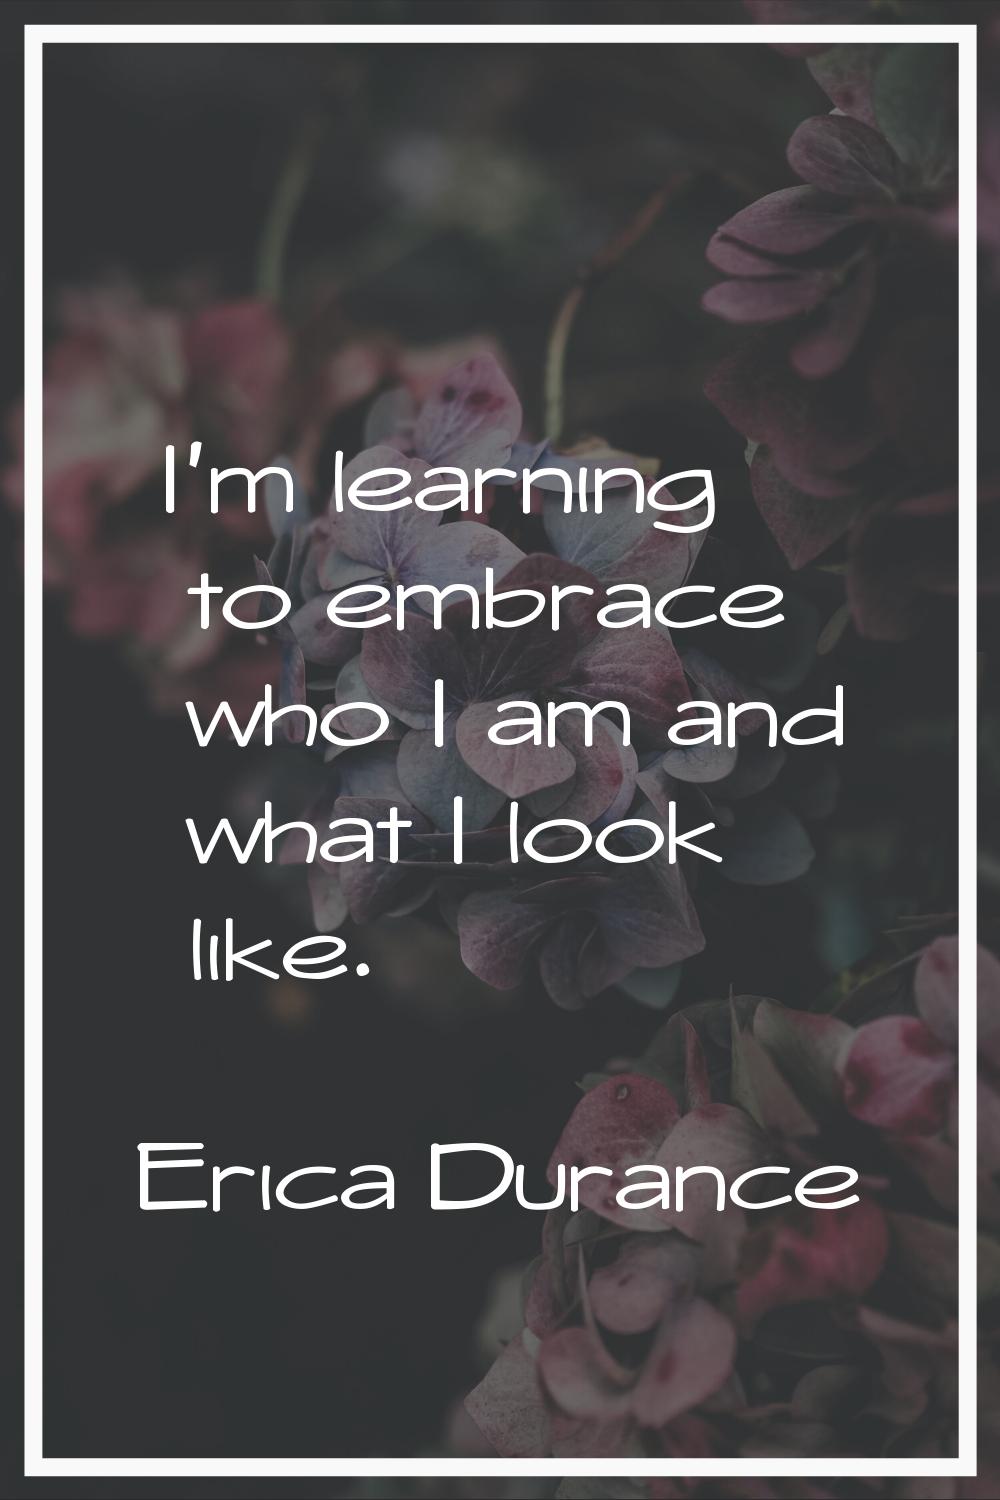 I'm learning to embrace who I am and what I look like.